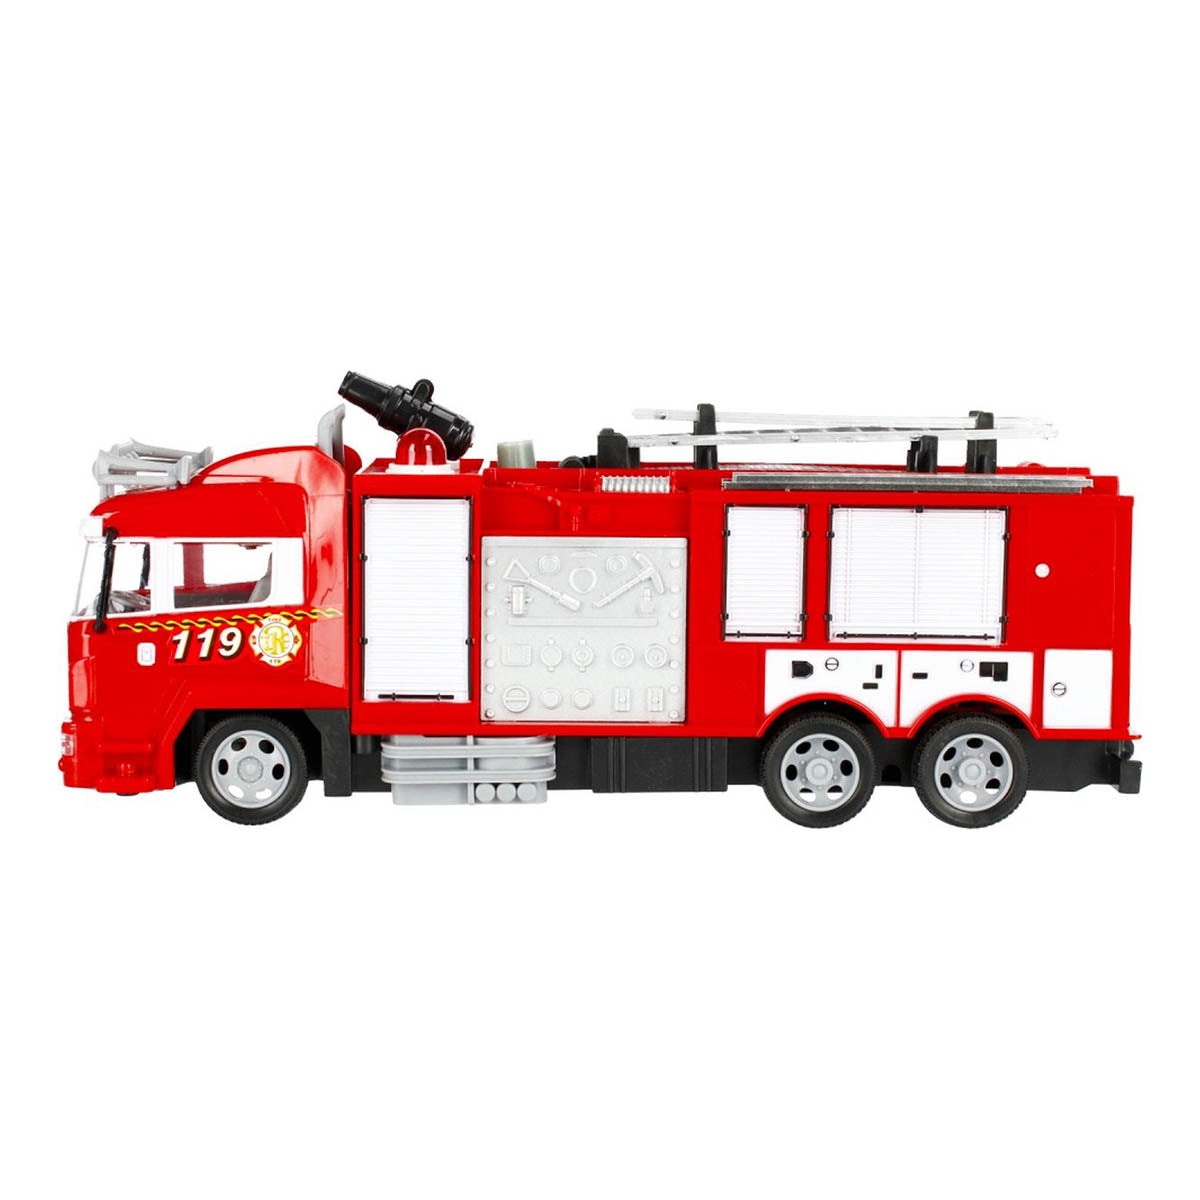 <tc>Ariko</tc> RC fire brigade water spray car - with remote control - Fire truck sprays real water and light effects - Spray car - Including battery and 2 x Philips AA batteries